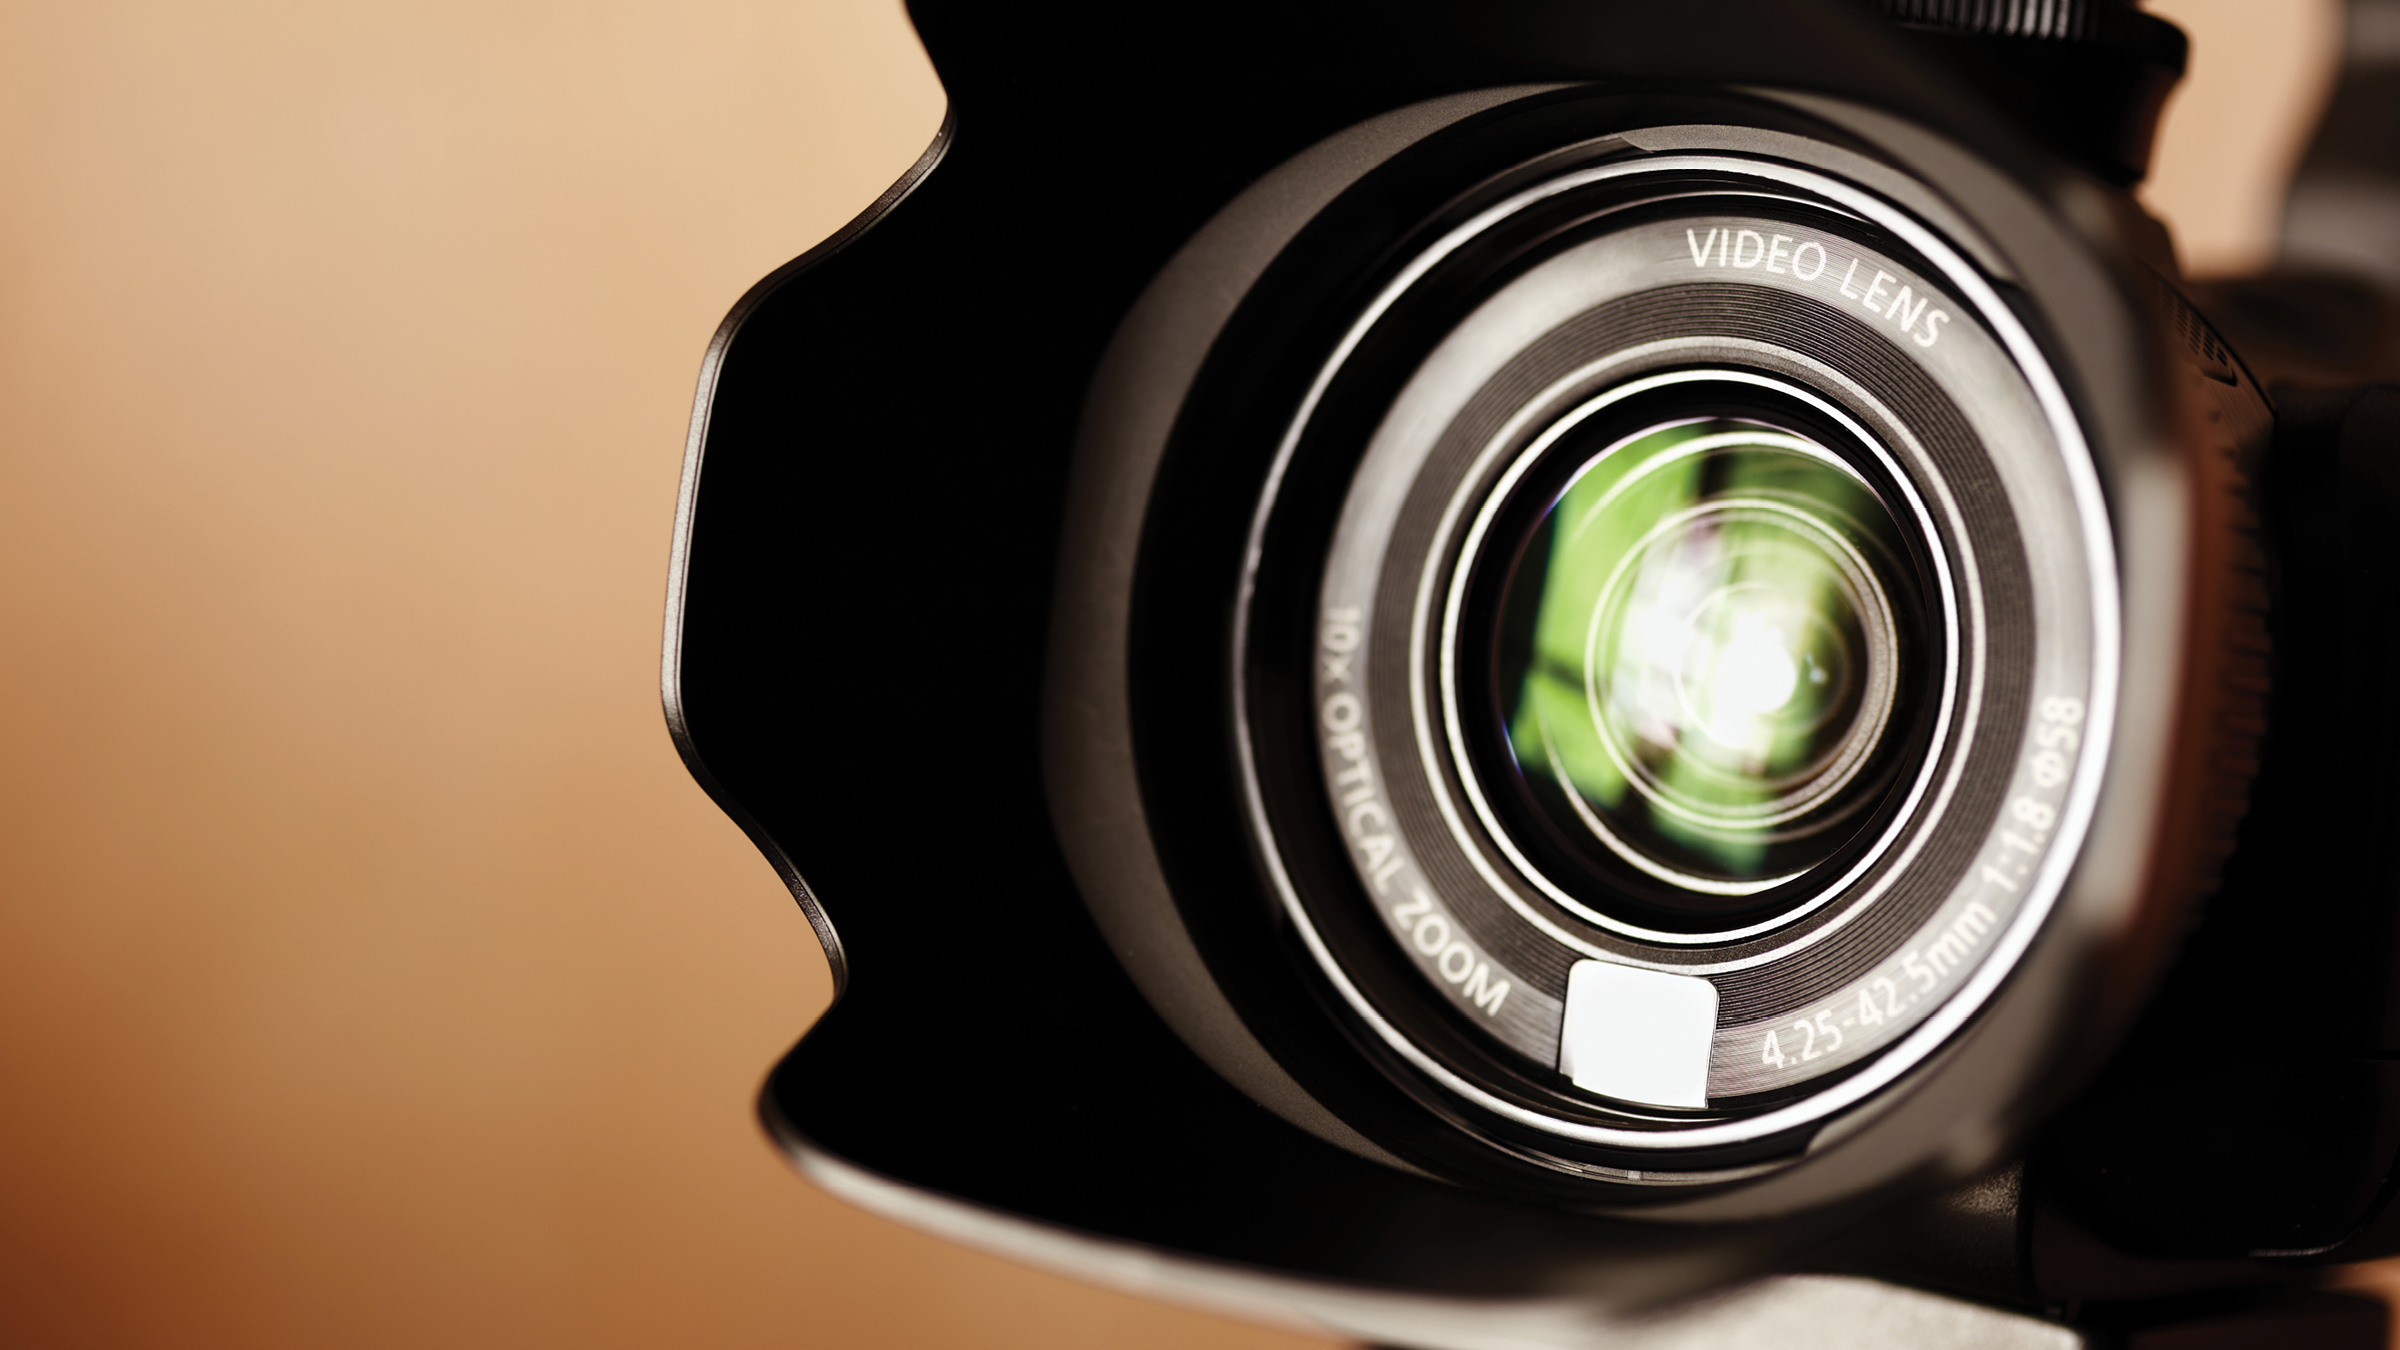 Video production services for organizations, businesses, and nonprofits